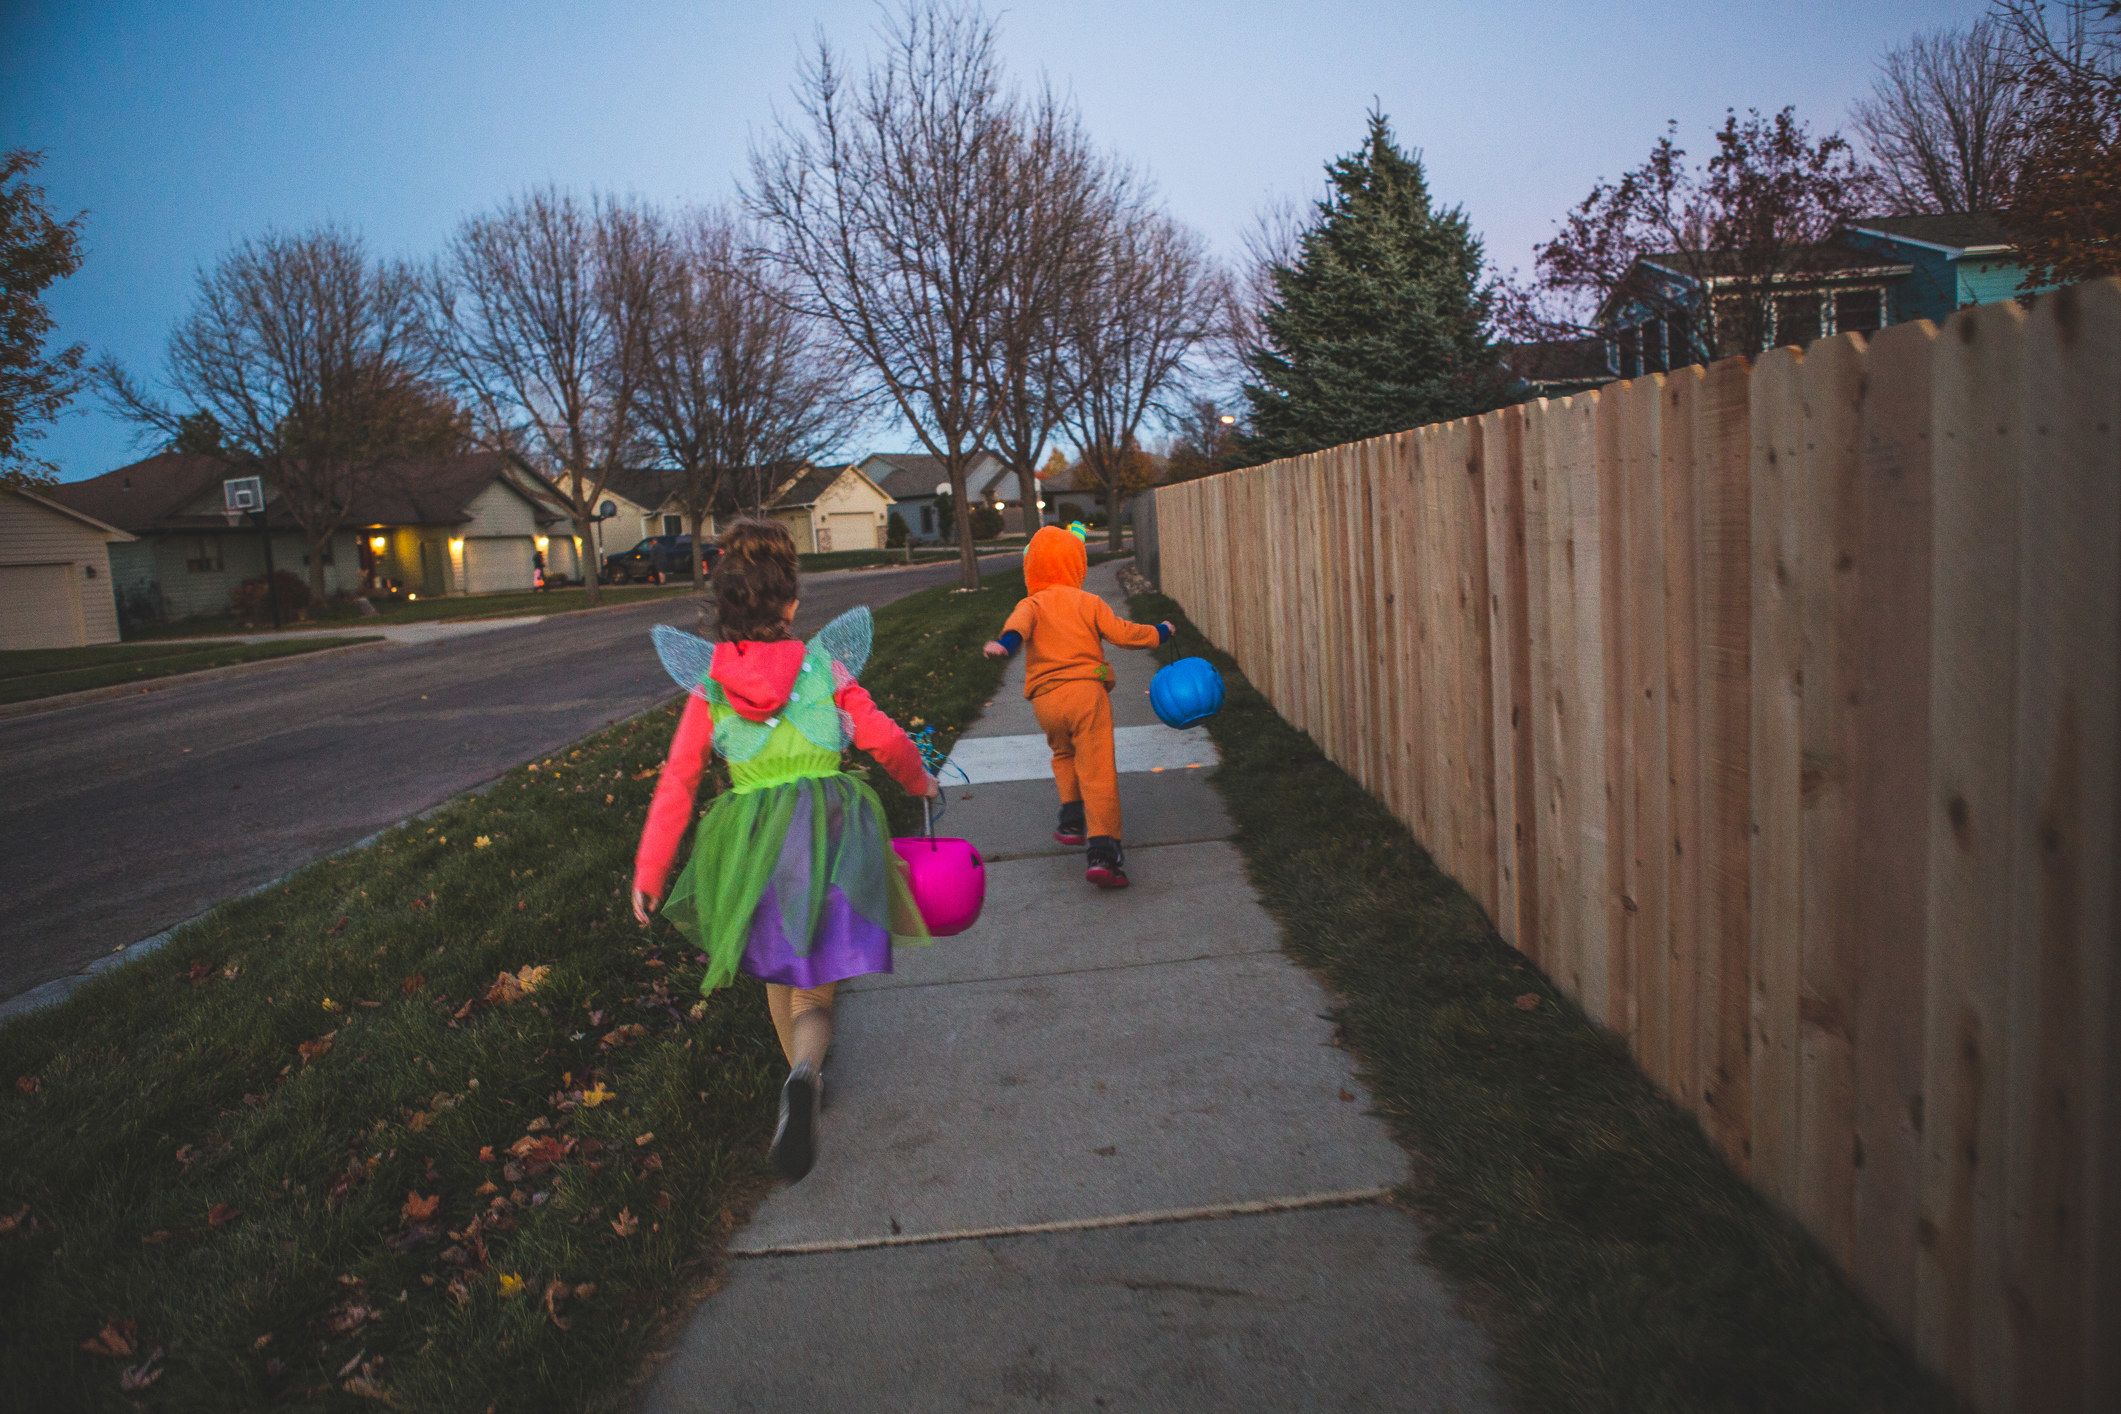 Kids in costumes trick or treating.